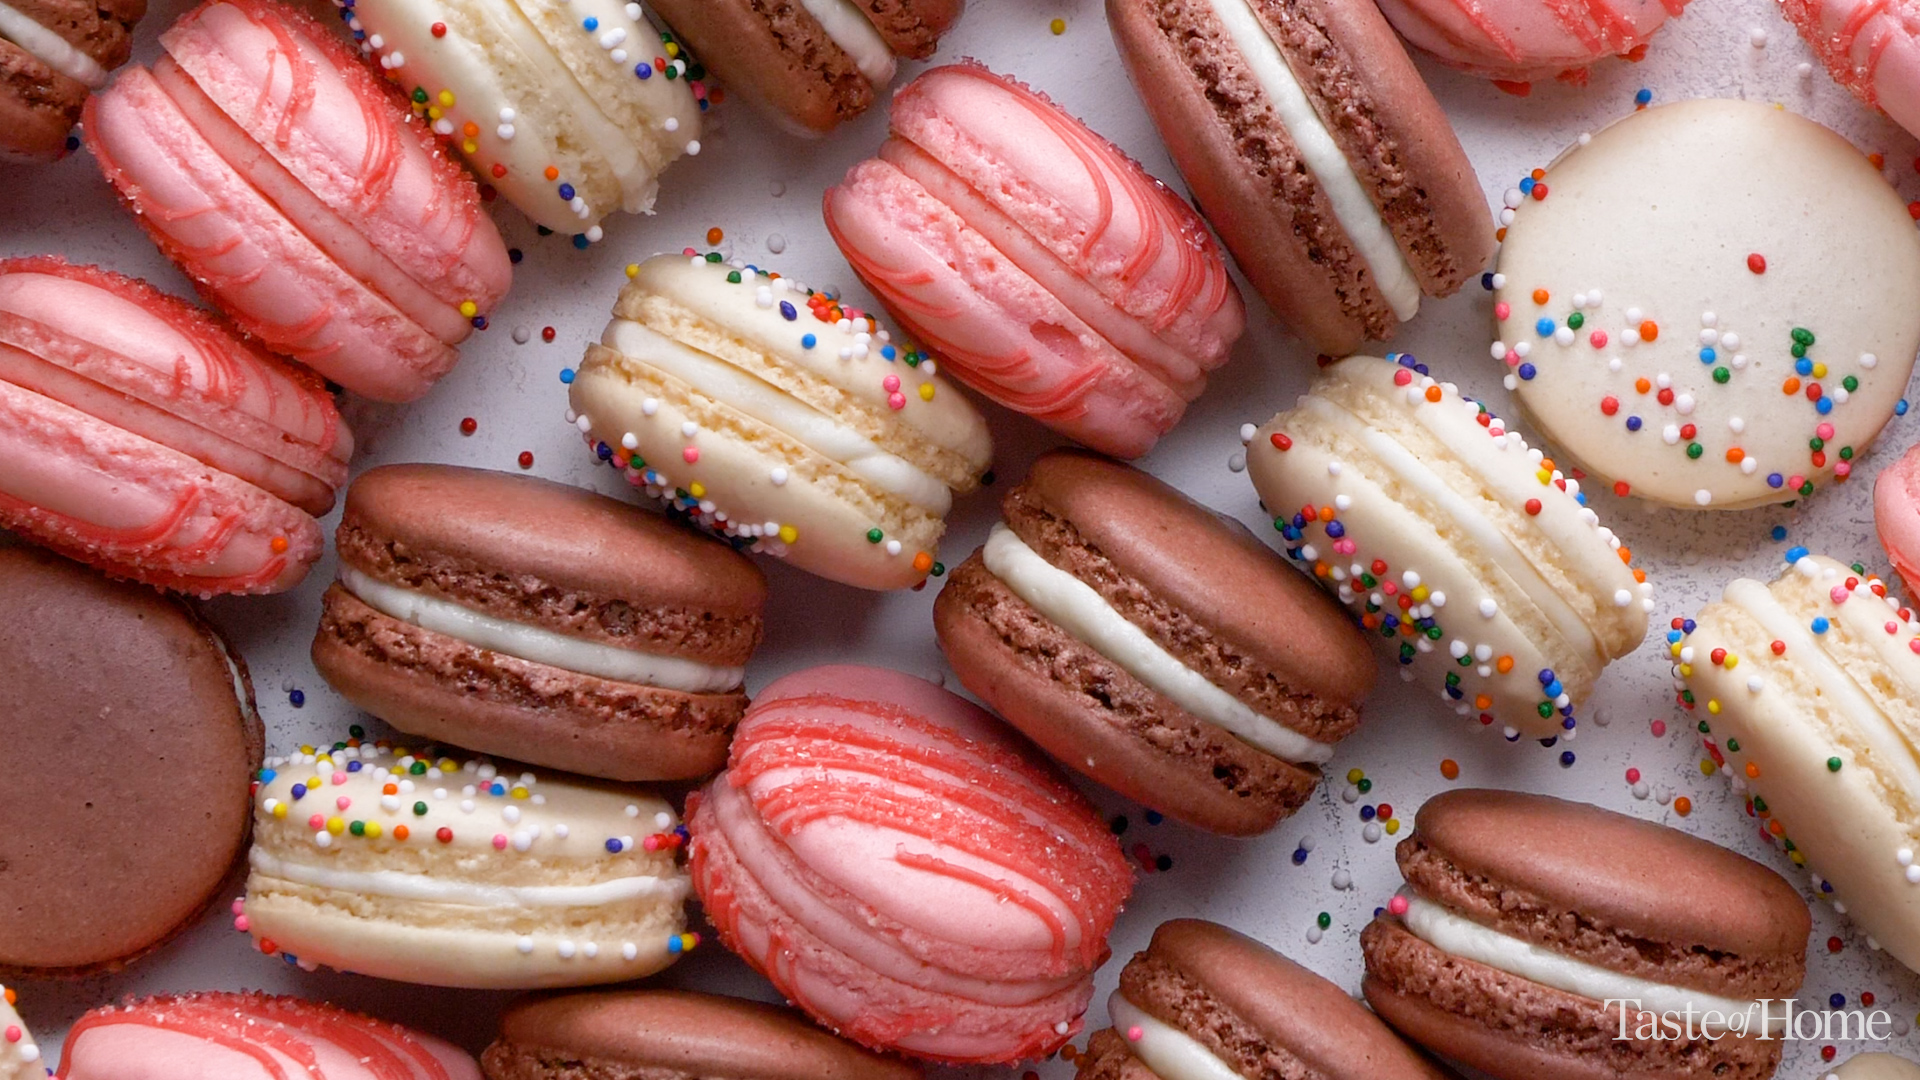 Macaron Supply List: Everything You Need to Make Your Own Macarons